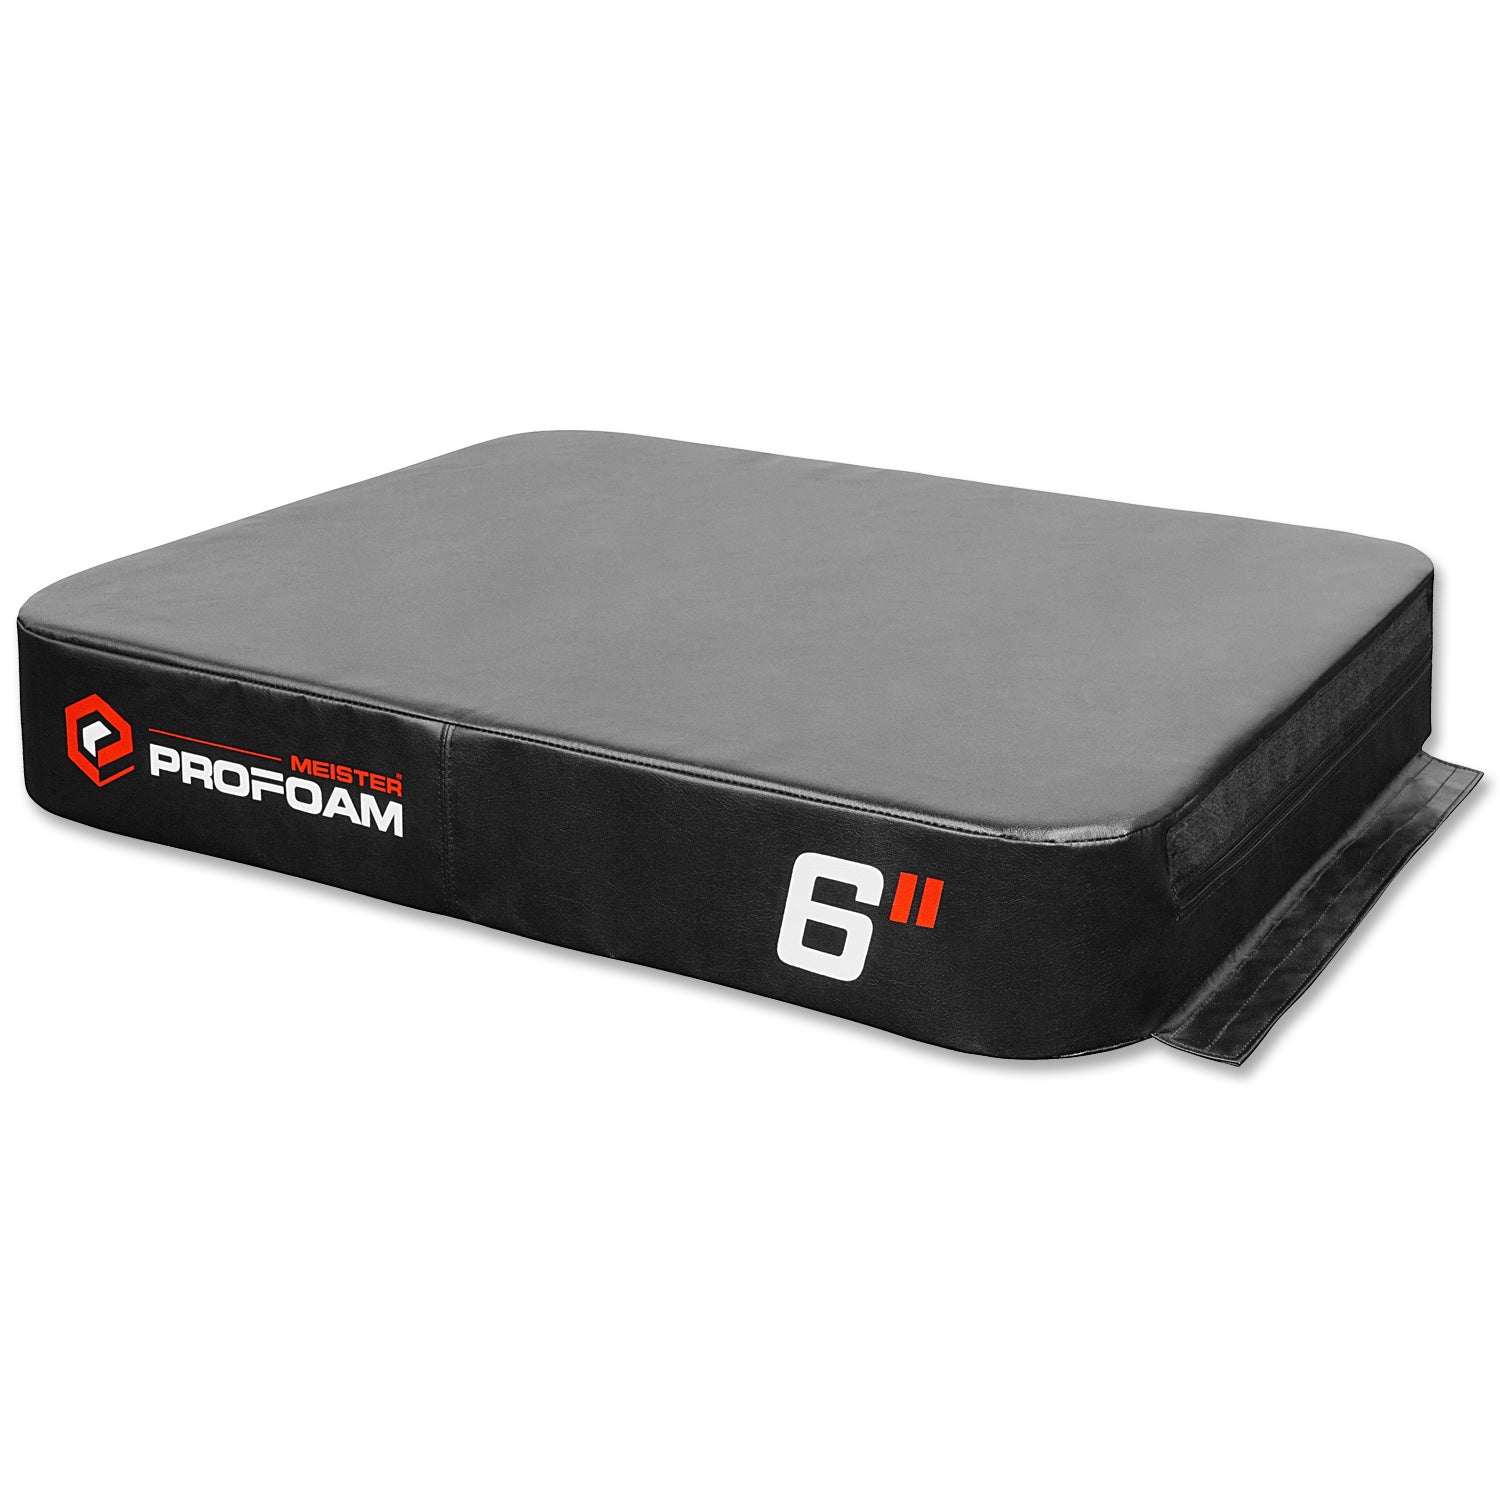 6" Meister PROFOAM™ Plyo Box for Professional Gyms